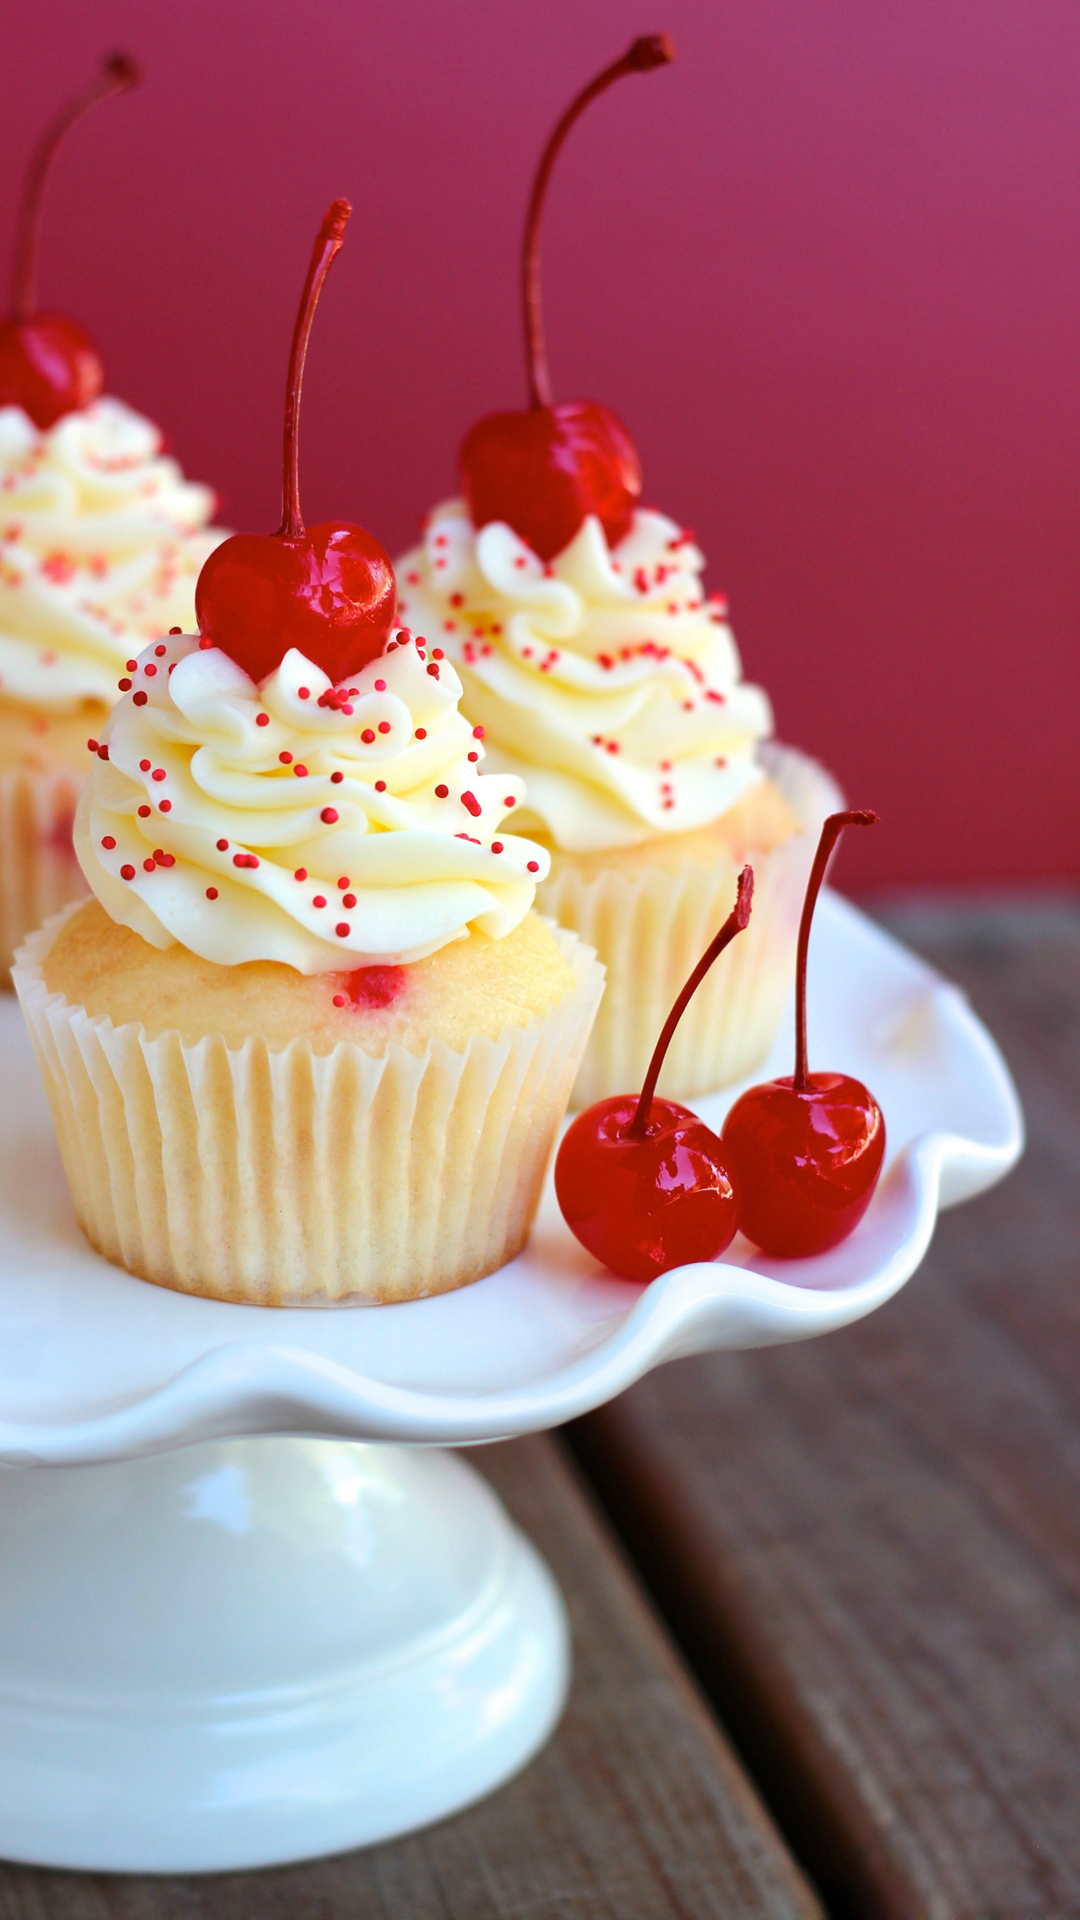 Cherry Cupcakes Htc One Wallpaper - Cupcake Wallpapers For Mobile - HD Wallpaper 